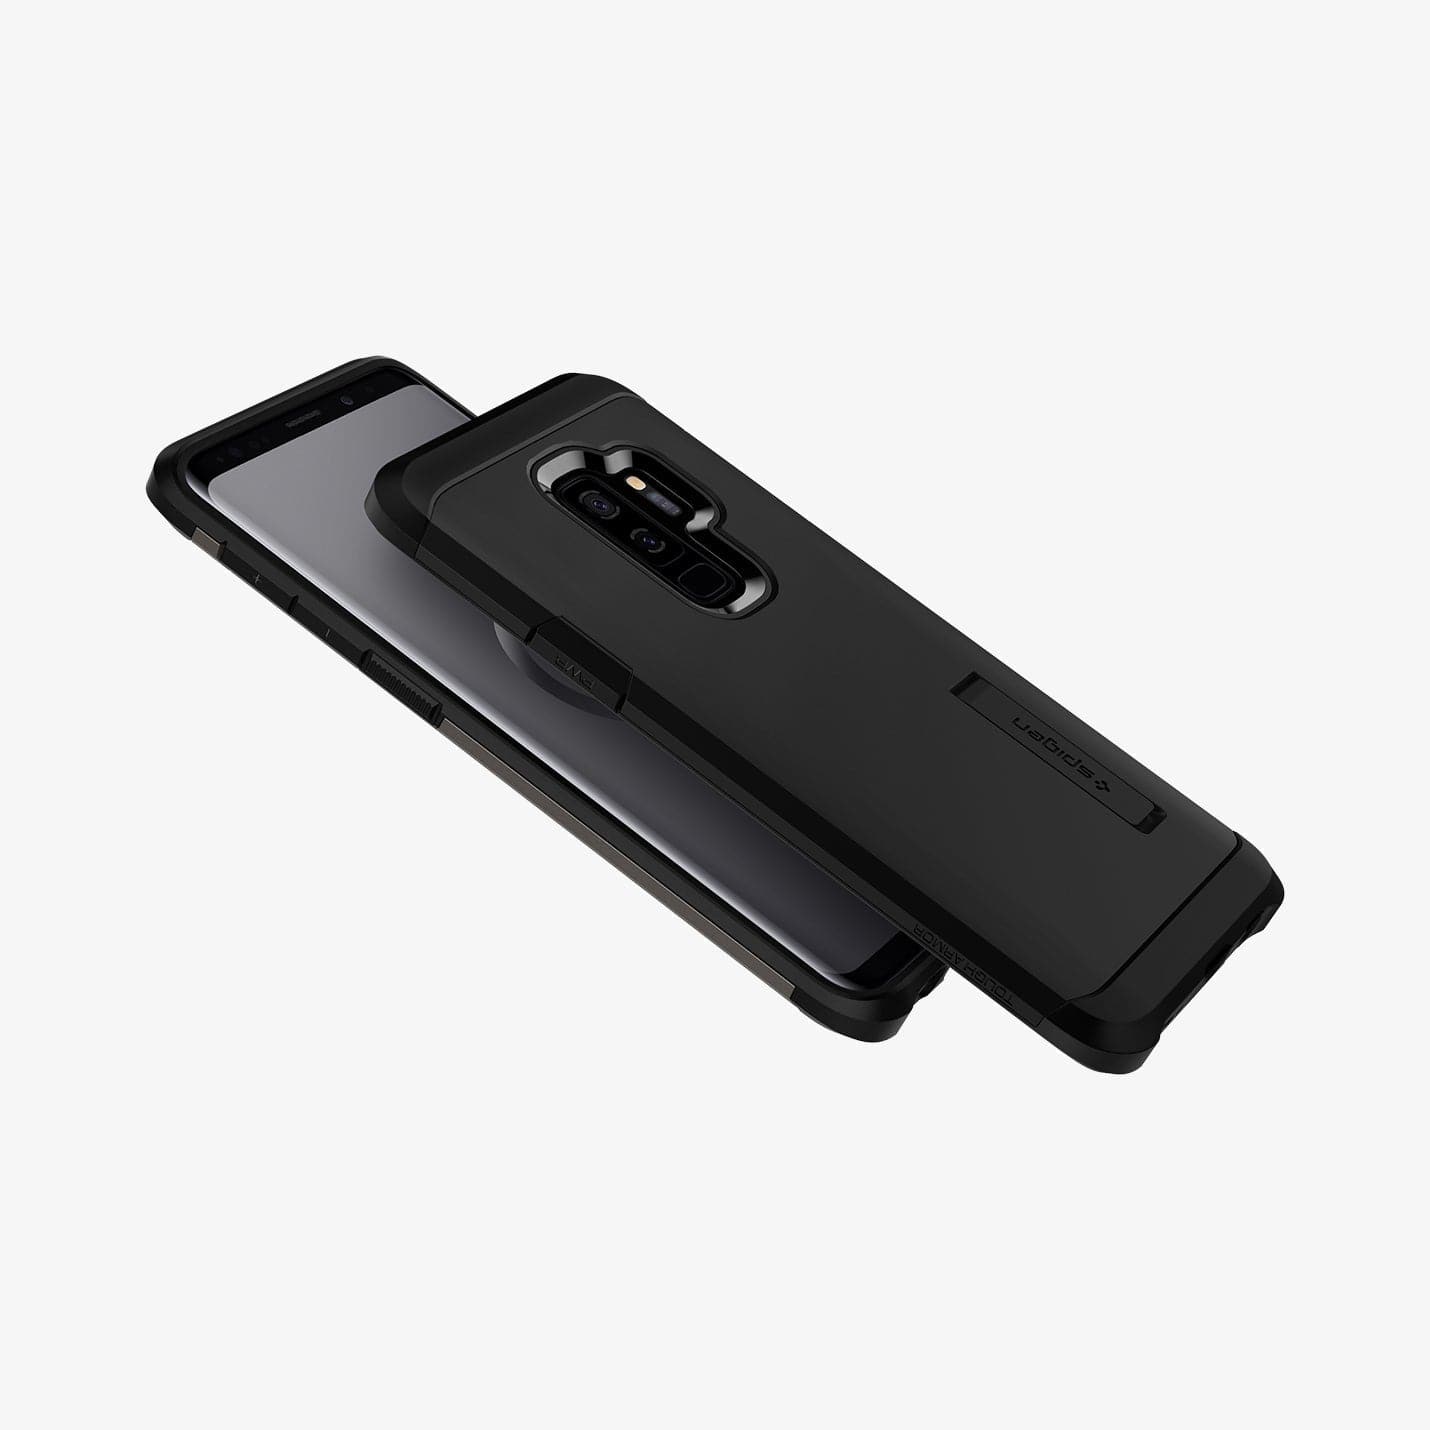 593CS22933 - Galaxy S9 Plus Tough Armor Case in black showing the back and side of two devices